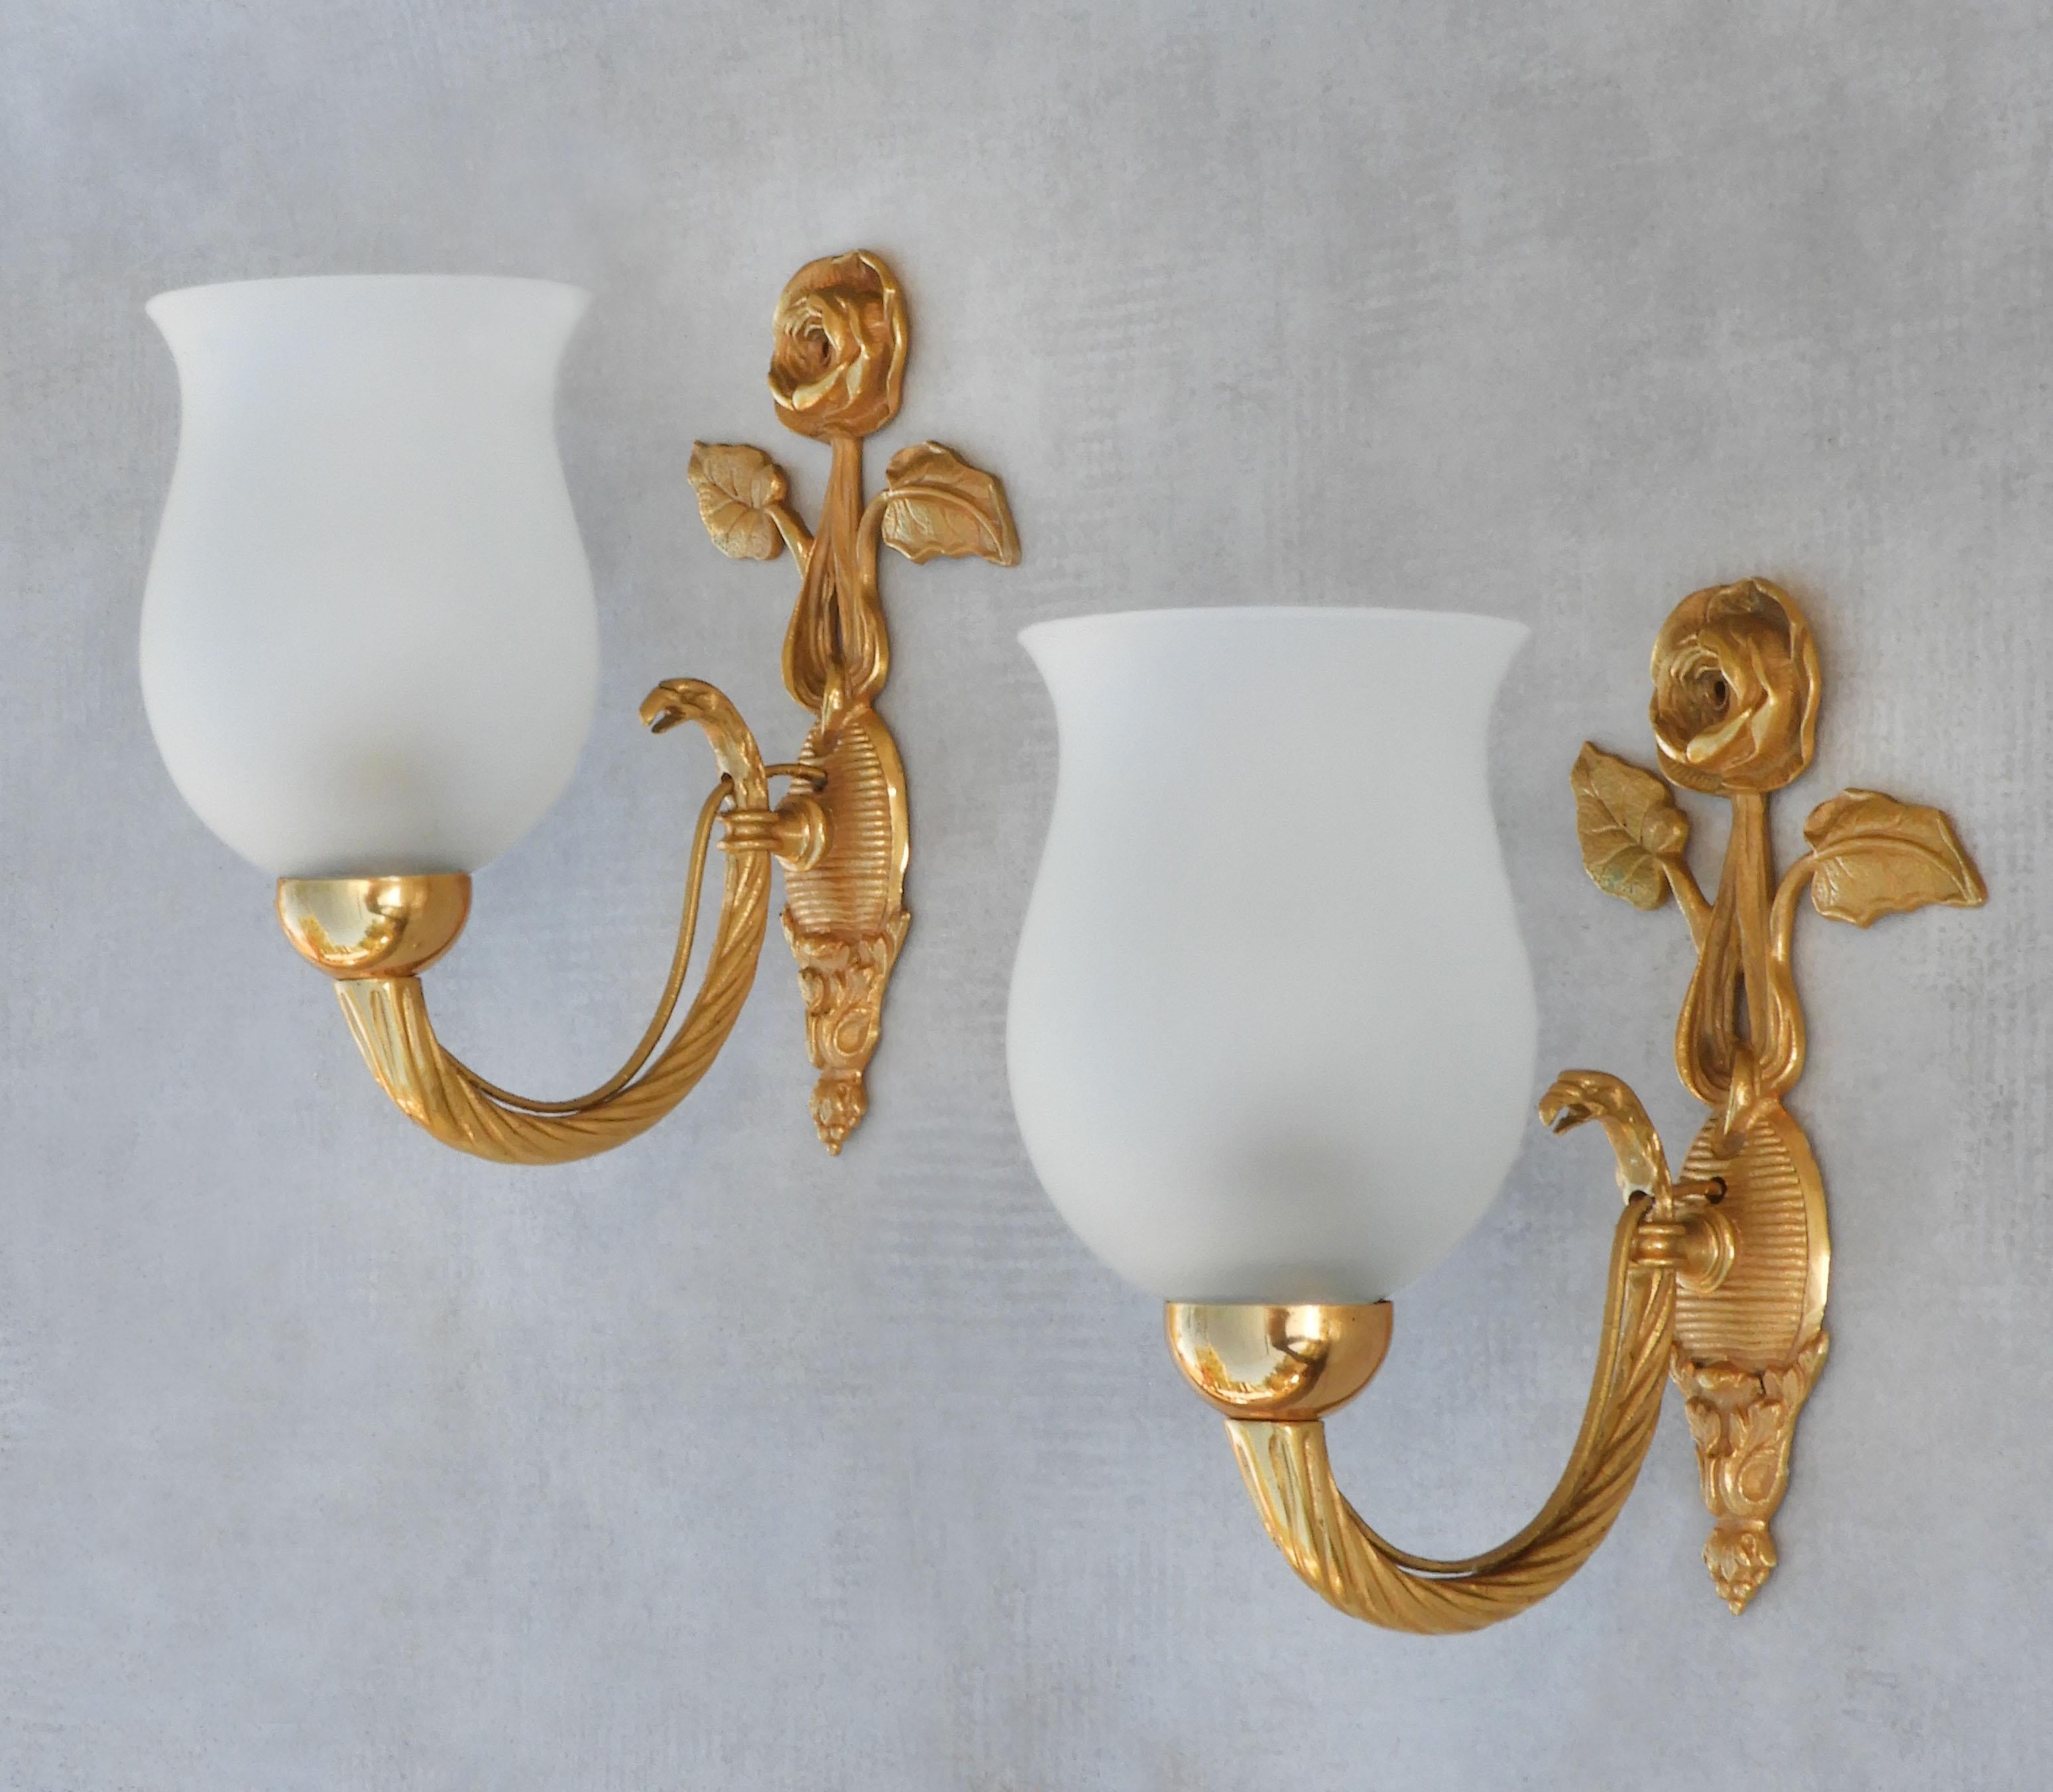 A beautiful pair of sconces from France C1950. Charming French wall lights in gilded brass and frosted glass. Mid-century empire revival featuring a rose bloom and eagle's head, a stylish modern take on a timeless classic design. Well-made,